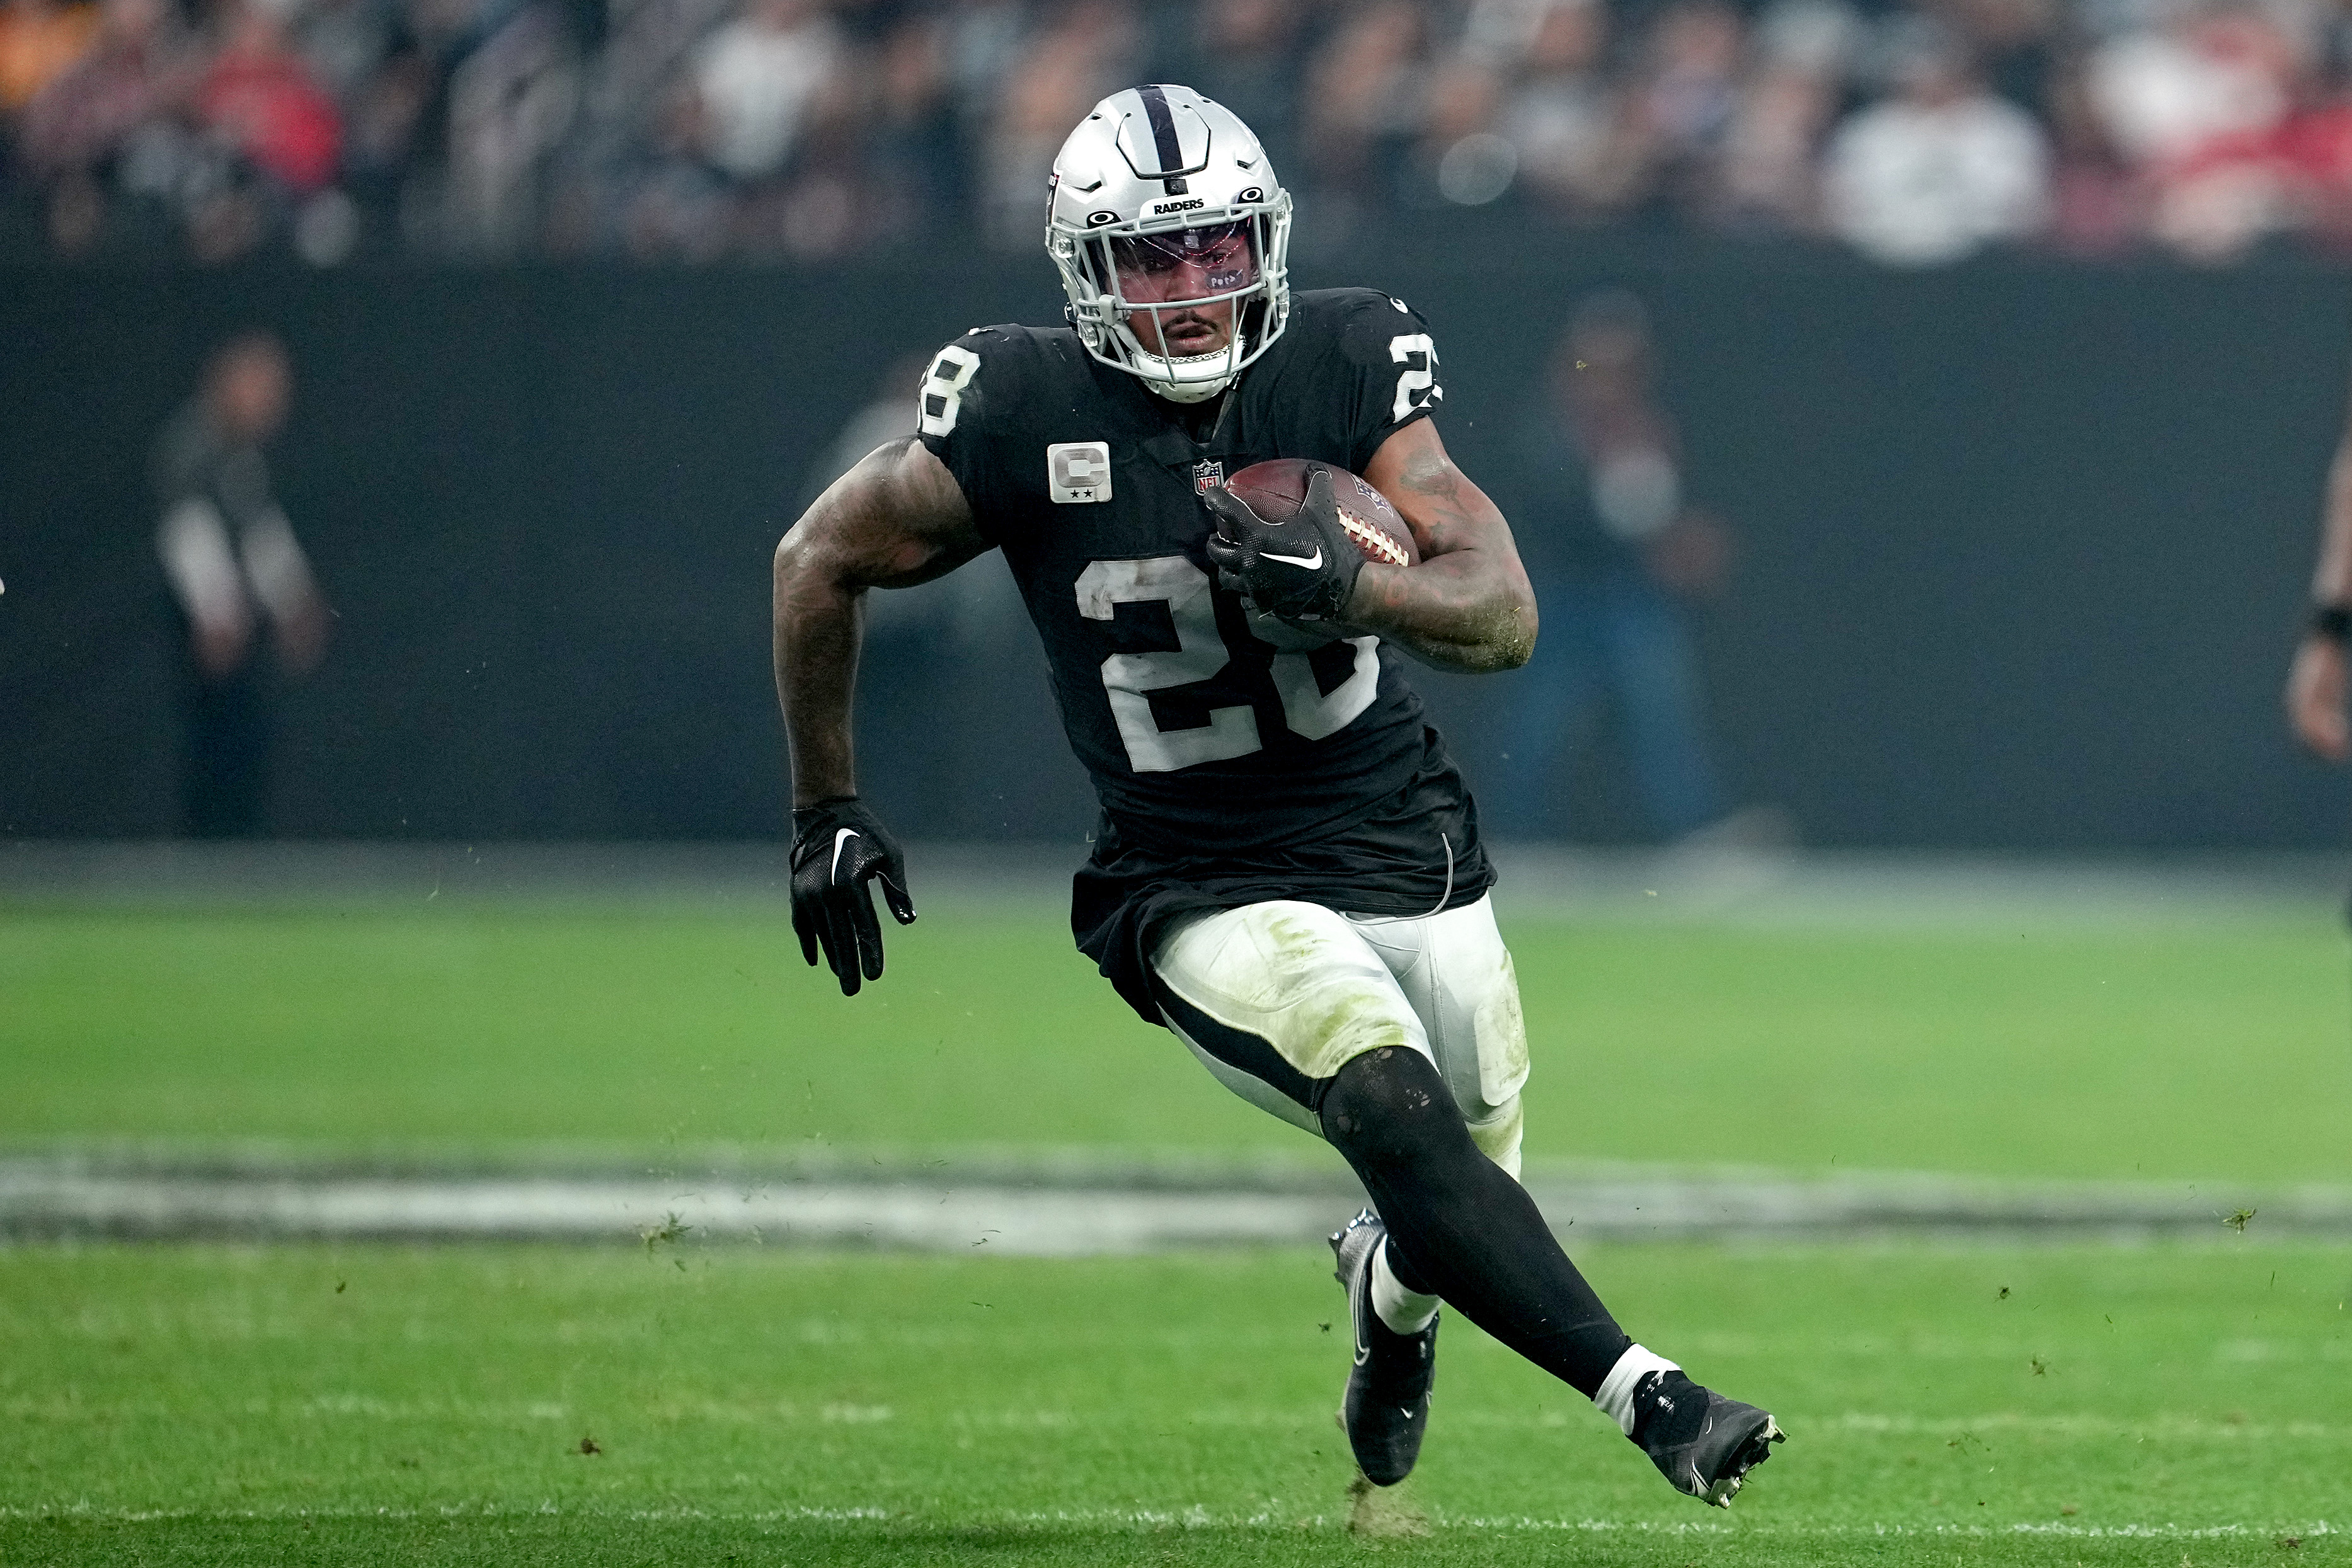 Running back Josh Jacbos of the Las Vegas Raiders carries the ball in the game against the Kansas City Chiefs at Allegiant Stadium in Las Vegas, Nevada, January 7, 2023. /CFP 